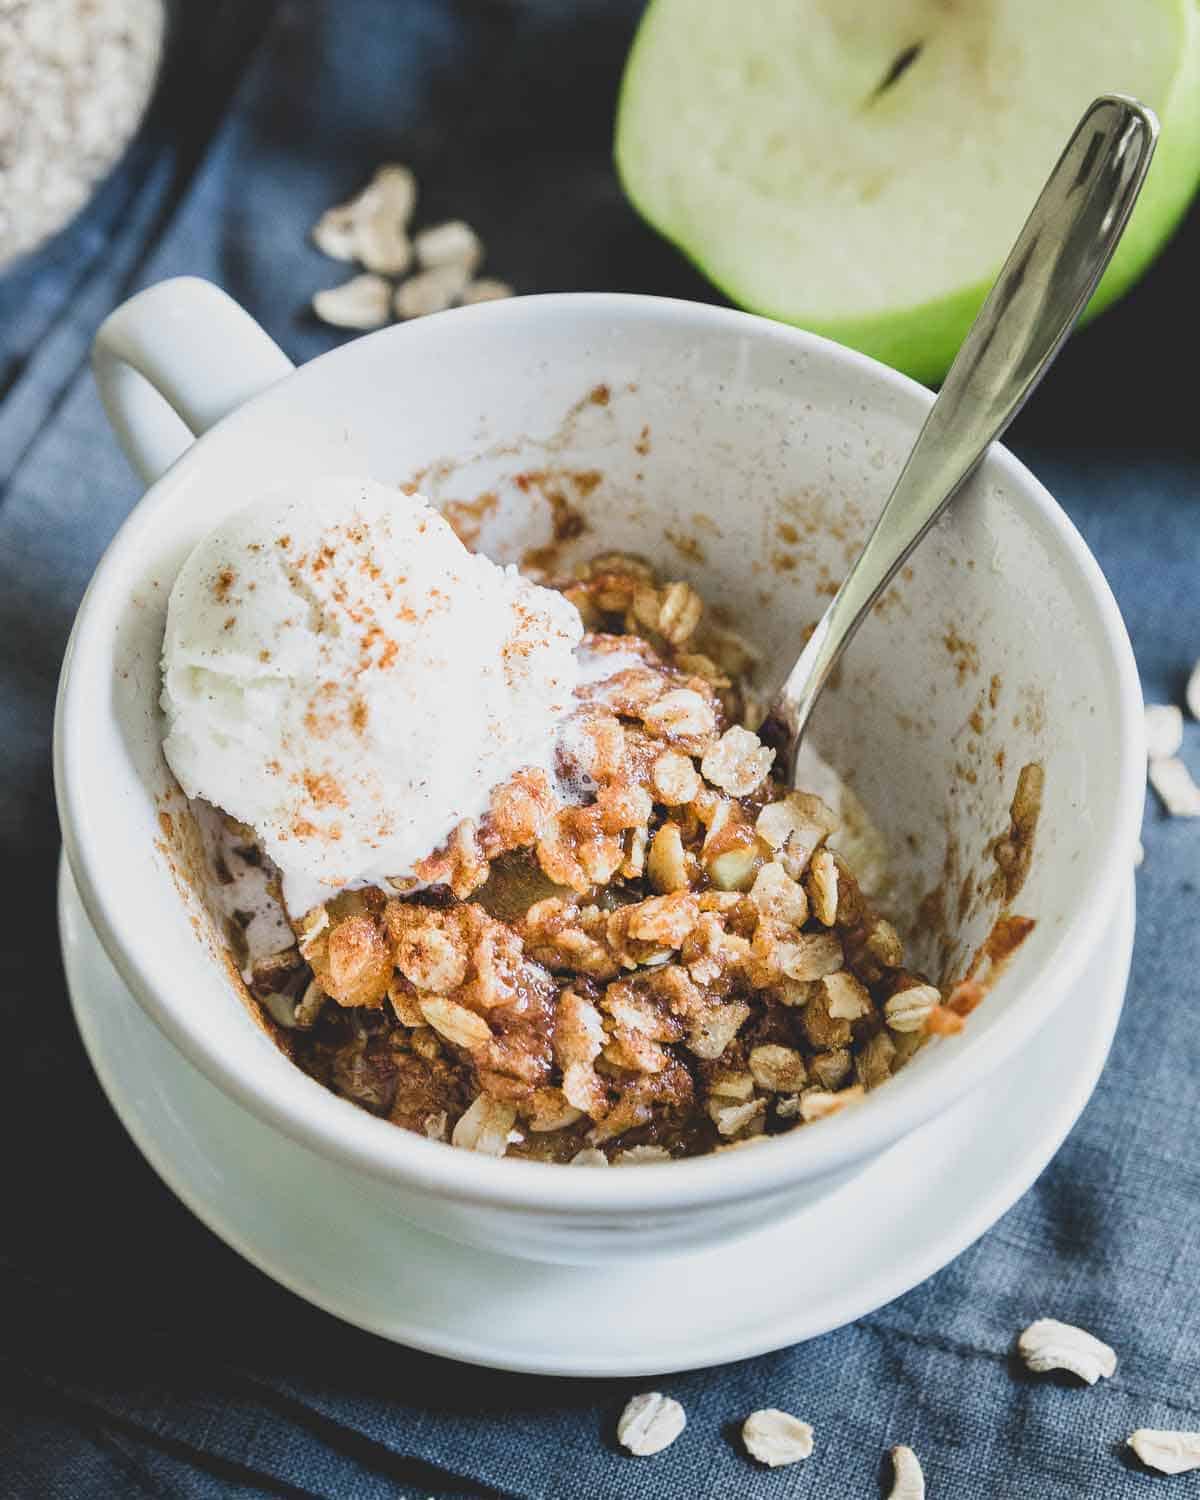 This easy microwave apple crisp recipe is a quick single serve option when you need a delicious fall dessert in minutes. Top with a scoop of ice cream or some whipped cream and enjoy!